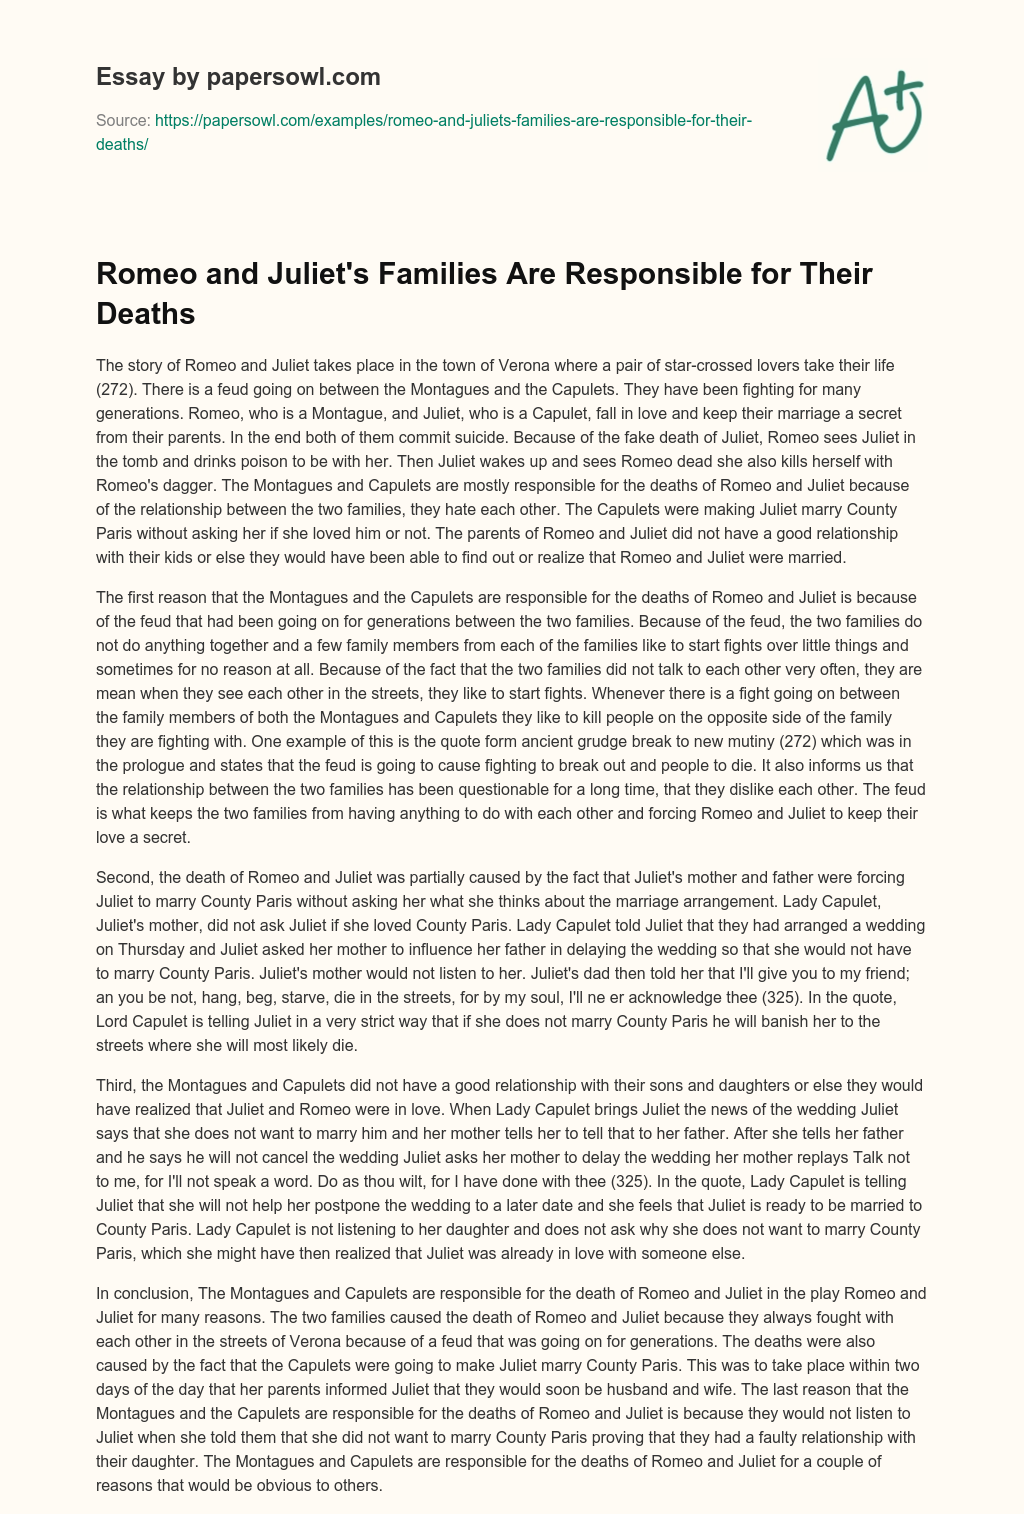 Romeo and Juliet’s Families are Responsible for their Deaths essay